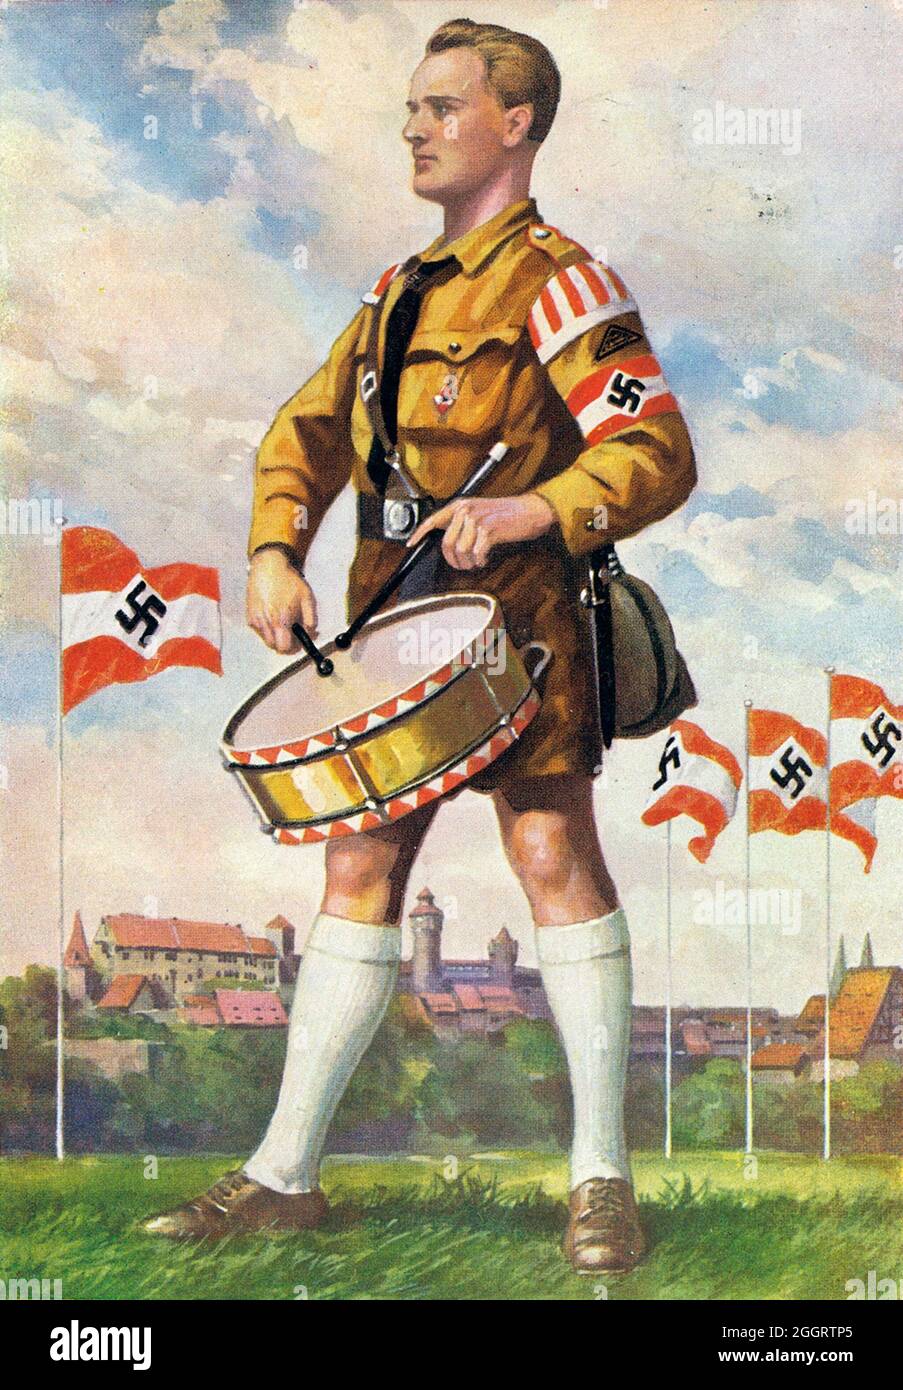 A vintage poster for the annual Nazi Nuremberg Rally showing a uniformed member of the Hitler Youth (Hitler-Jugend, HJ) playing a military drum Stock Photo